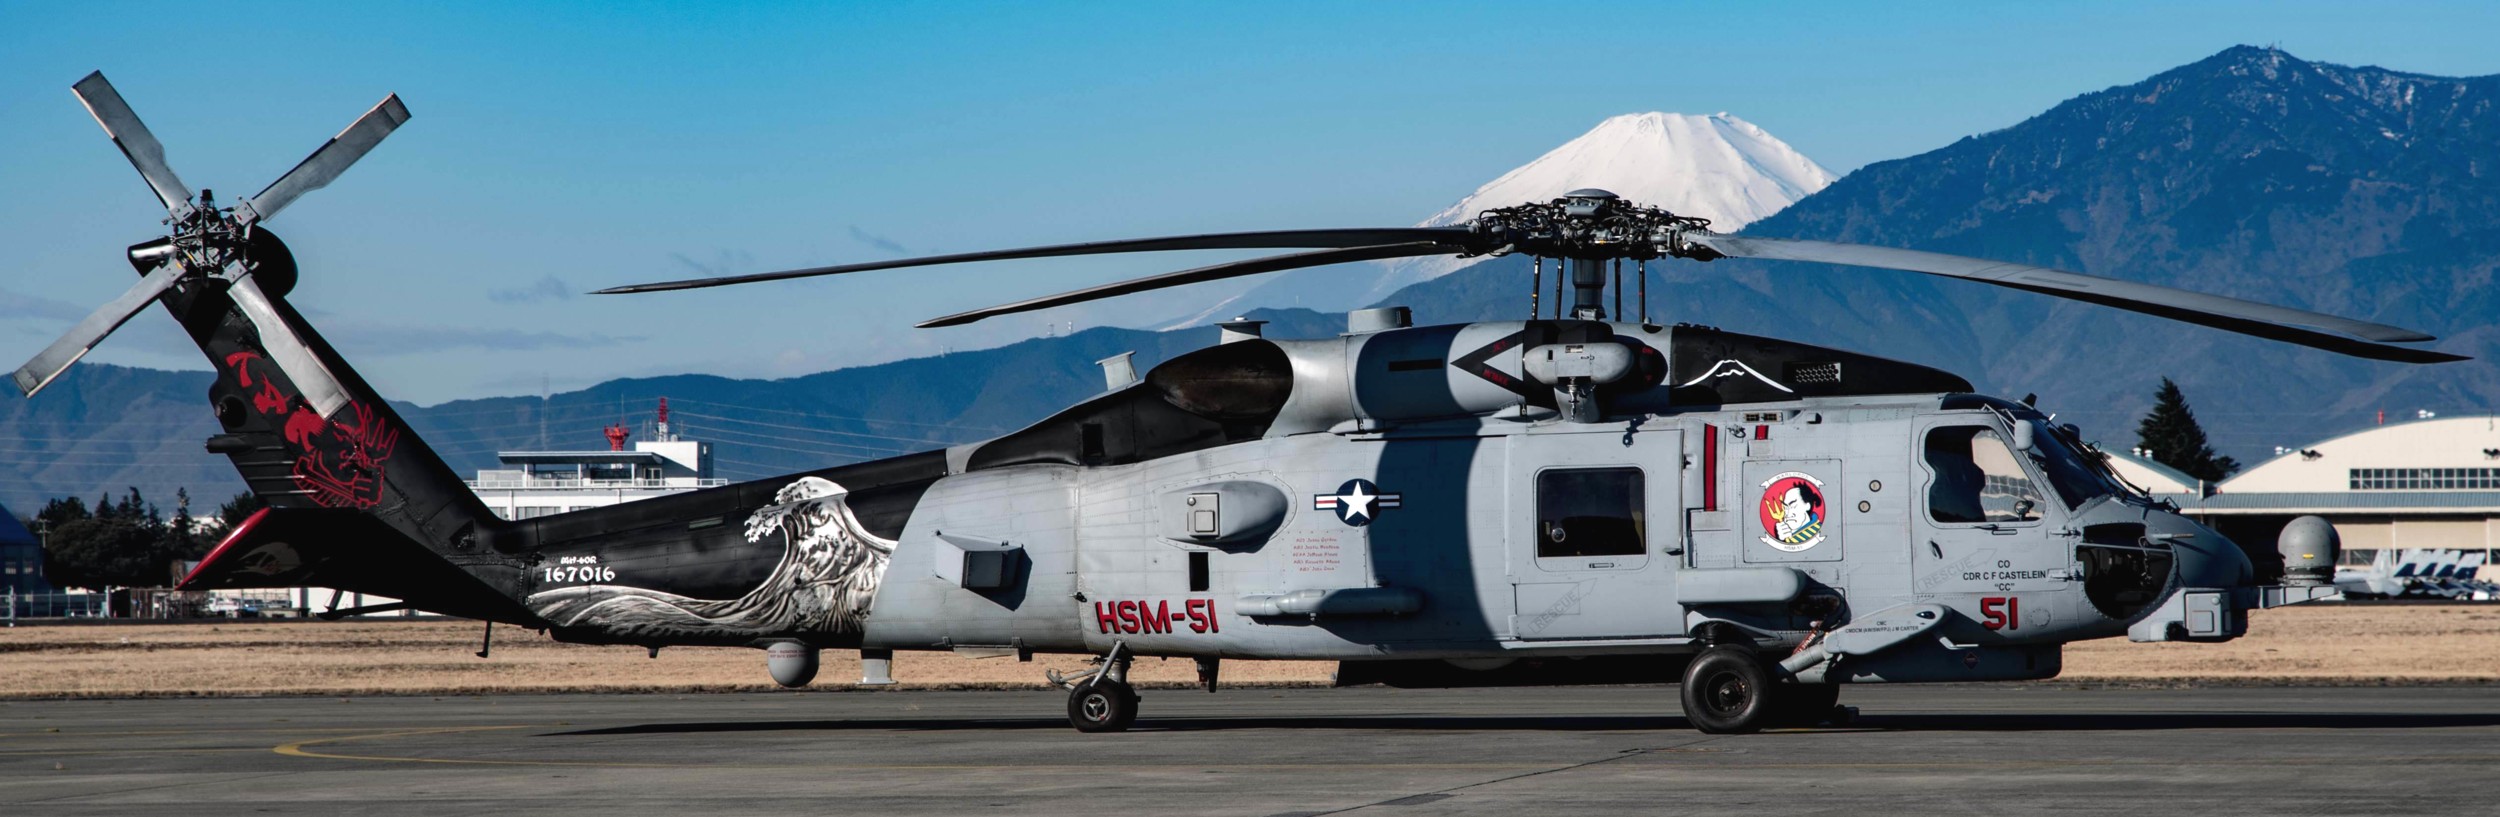 hsm-51 warlords helicopter maritime strike squadron mh-60r seahawk navy 2016 36 naval air facility atsugi japan